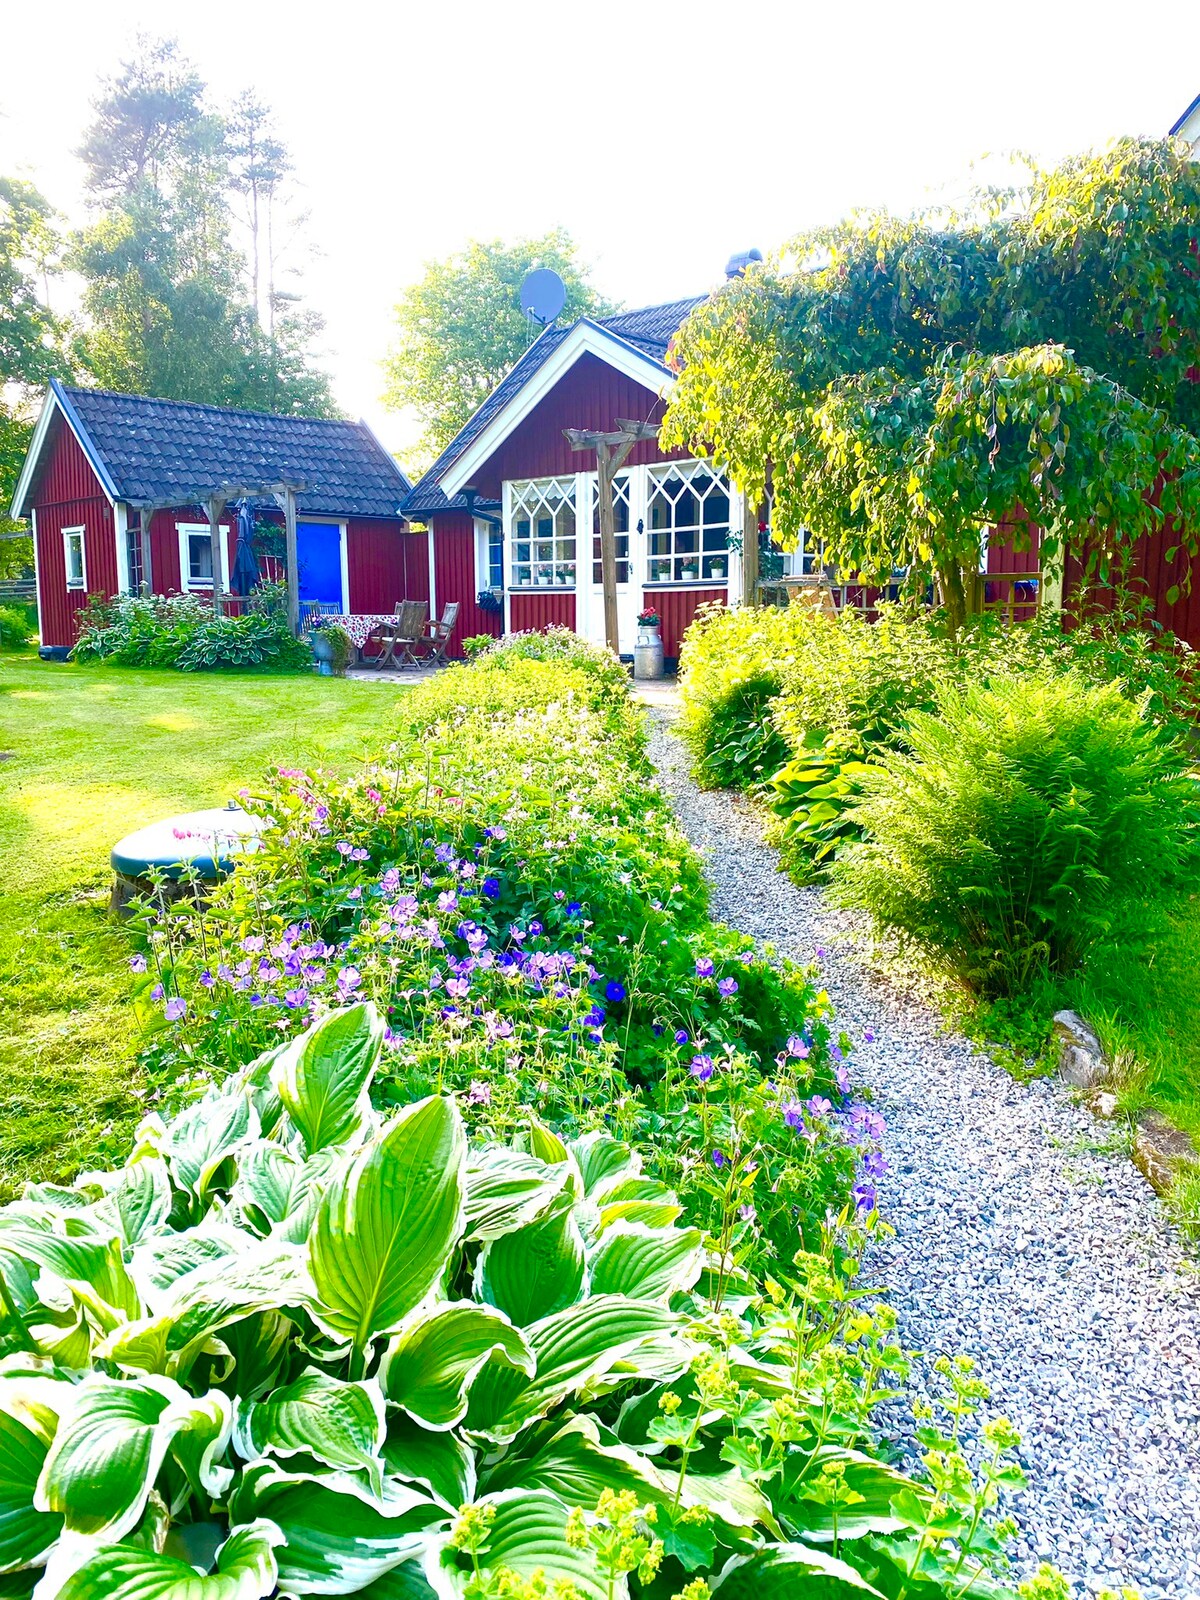 Cosy typical Swedish house in amazing nature.